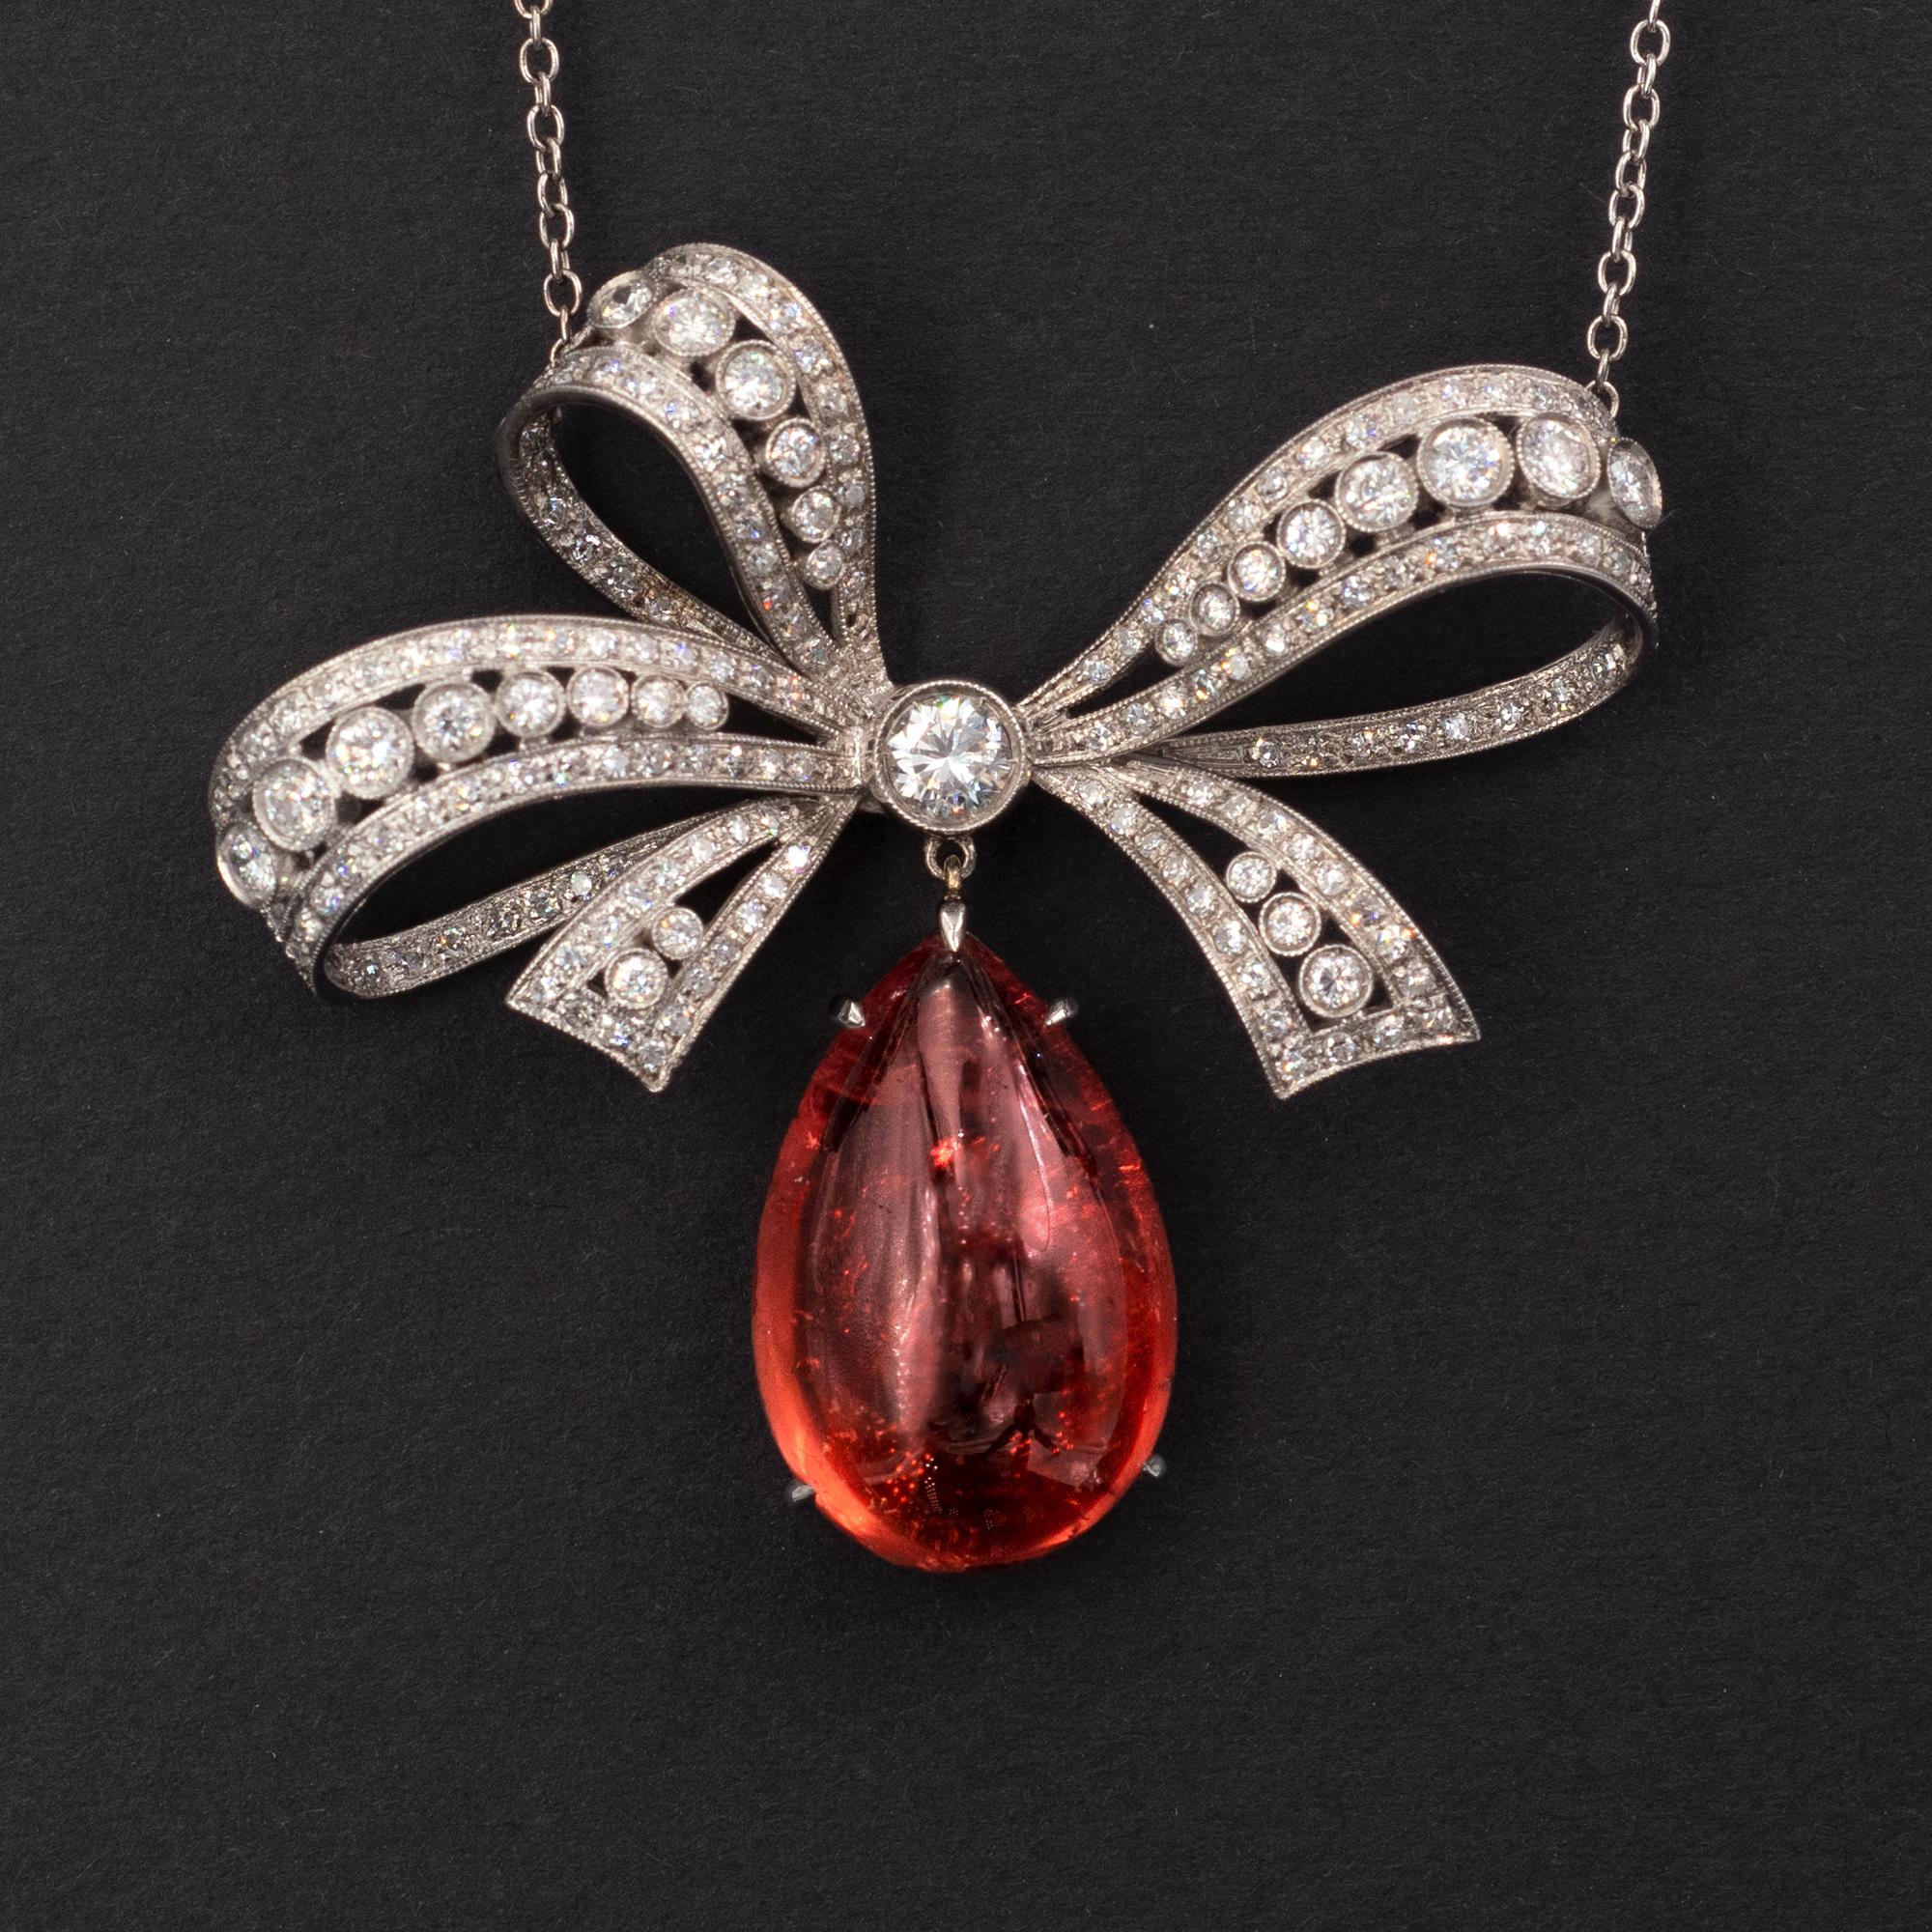 This is a refined necklace: a feminine bow with a sophisticated work reminiscing the Edwardian Belle-Epoque era, set with white diamonds, from which dandle a striking, pear-shaped cabochon tourmaline displaying a radiant pinkish-orange color. The